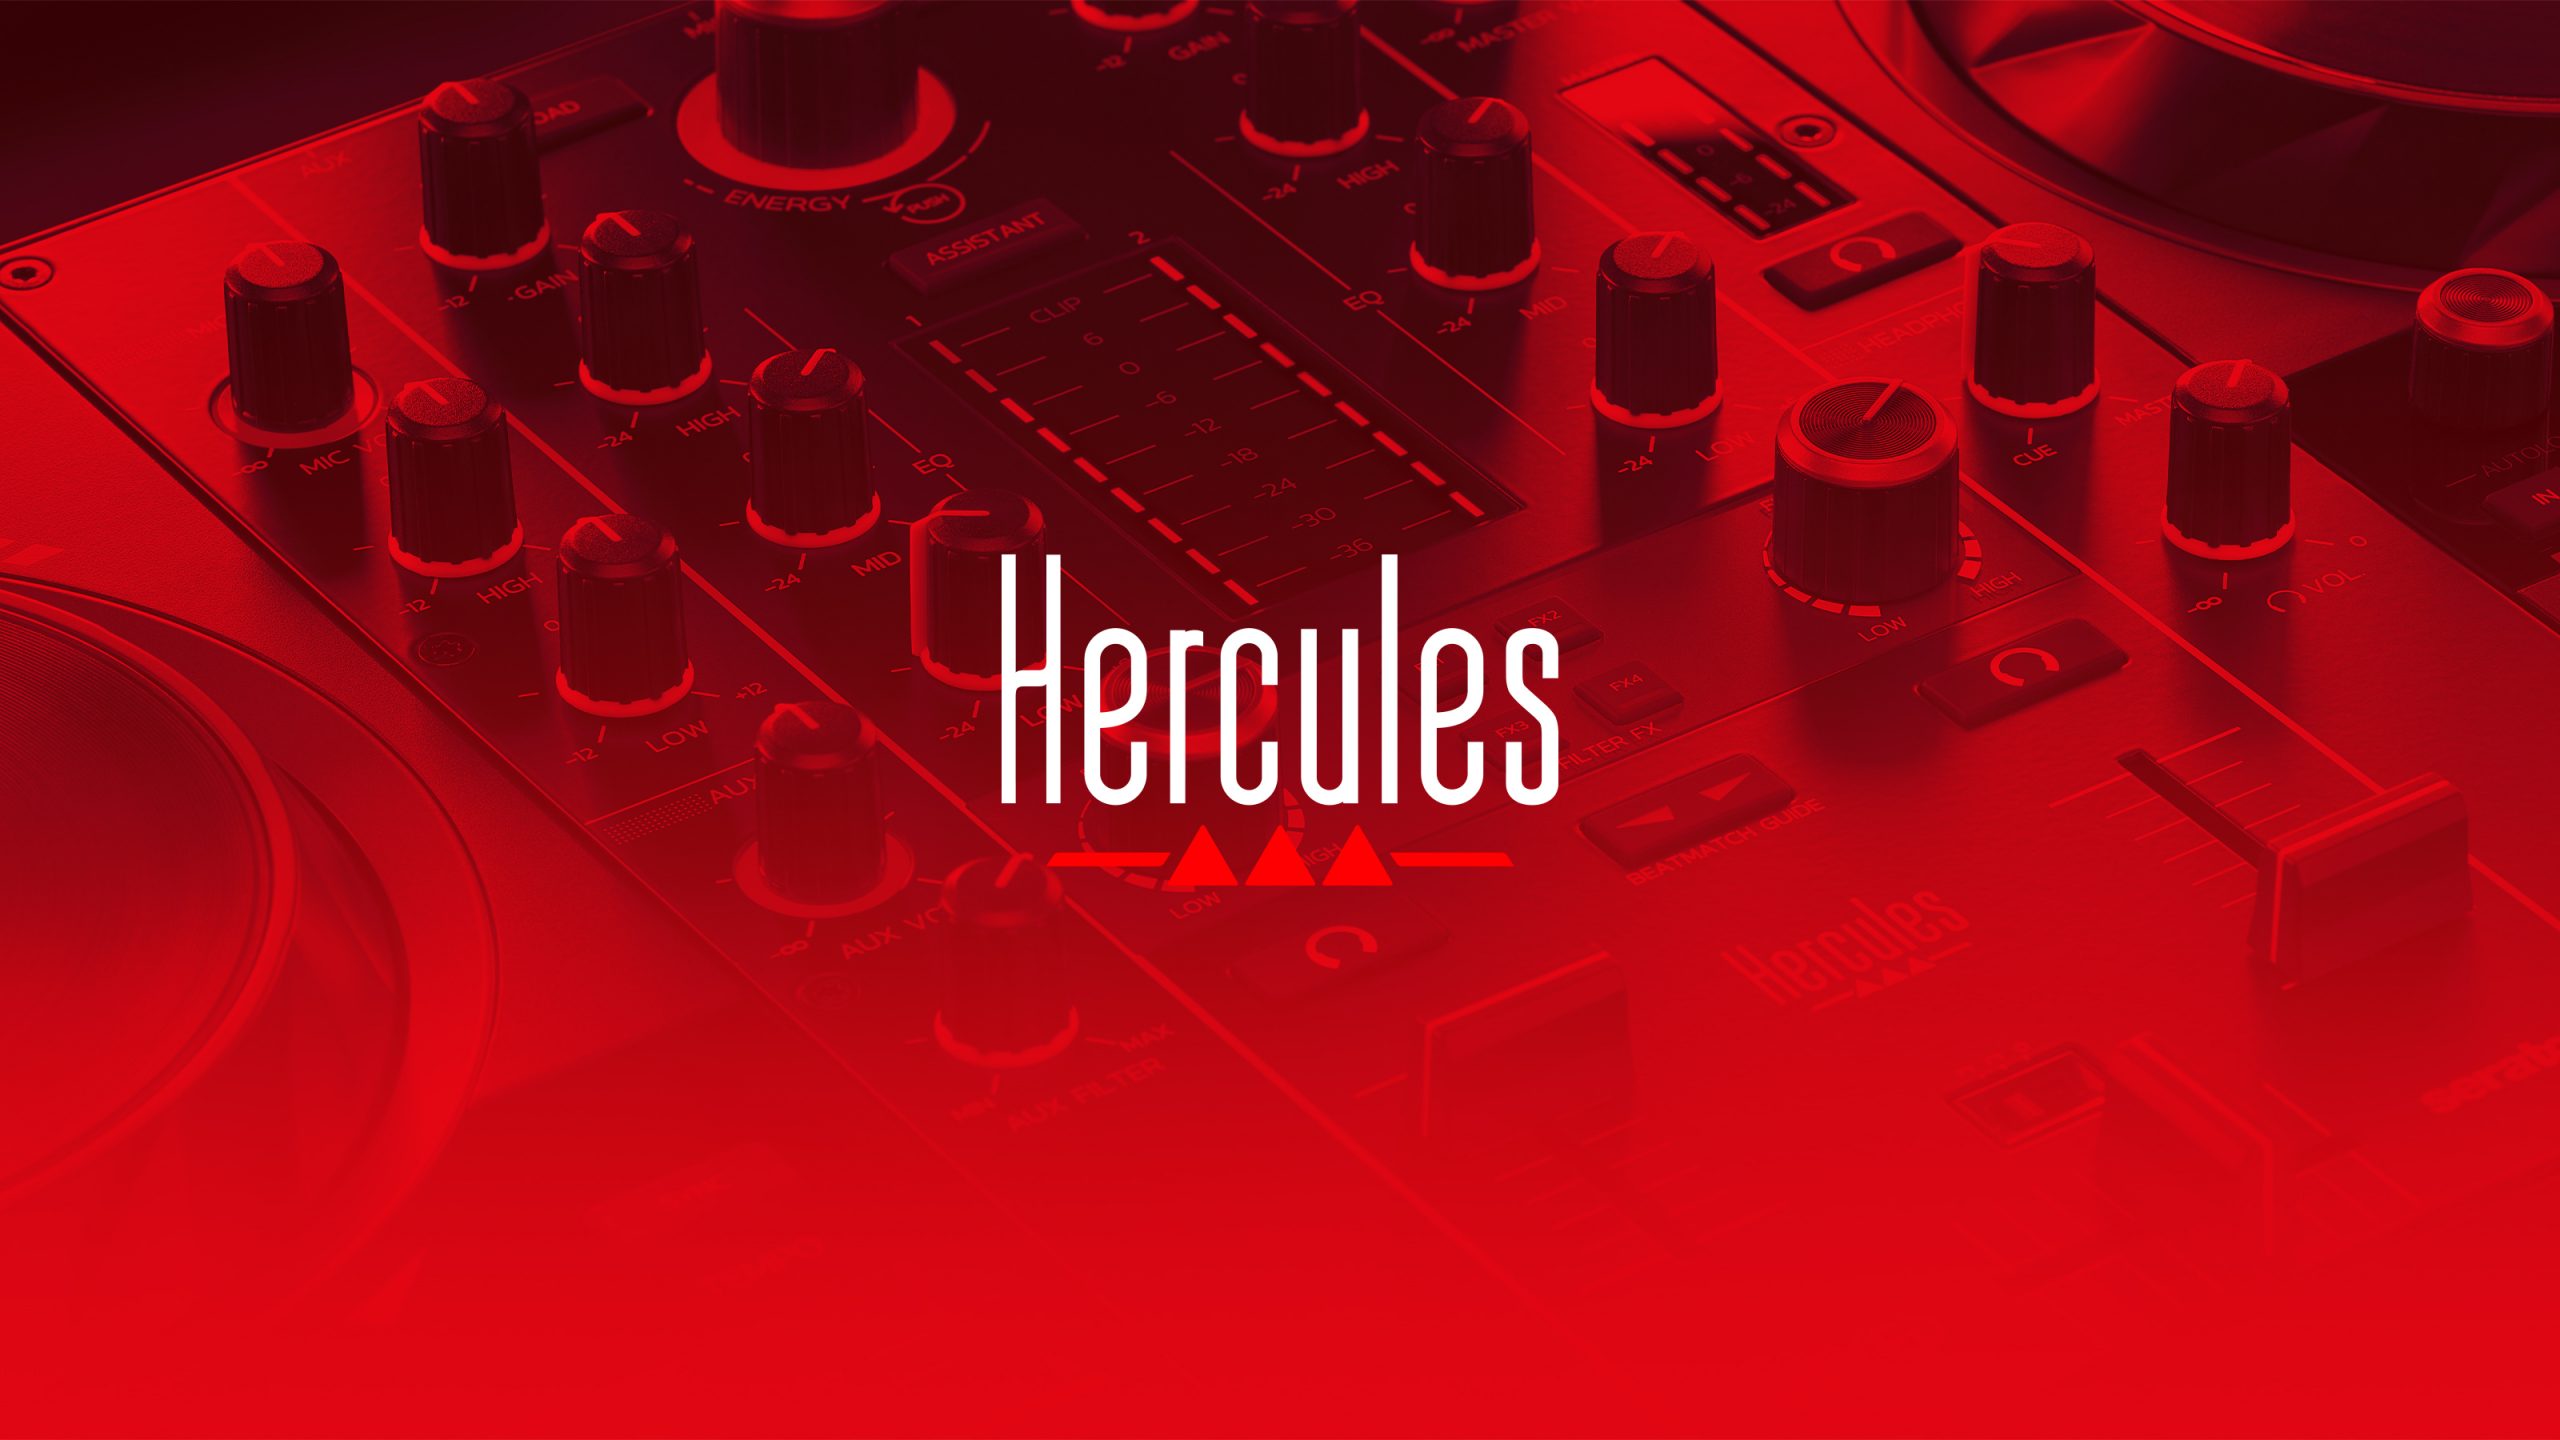 Hercules - Start and learn to mix easily and become a DJ!